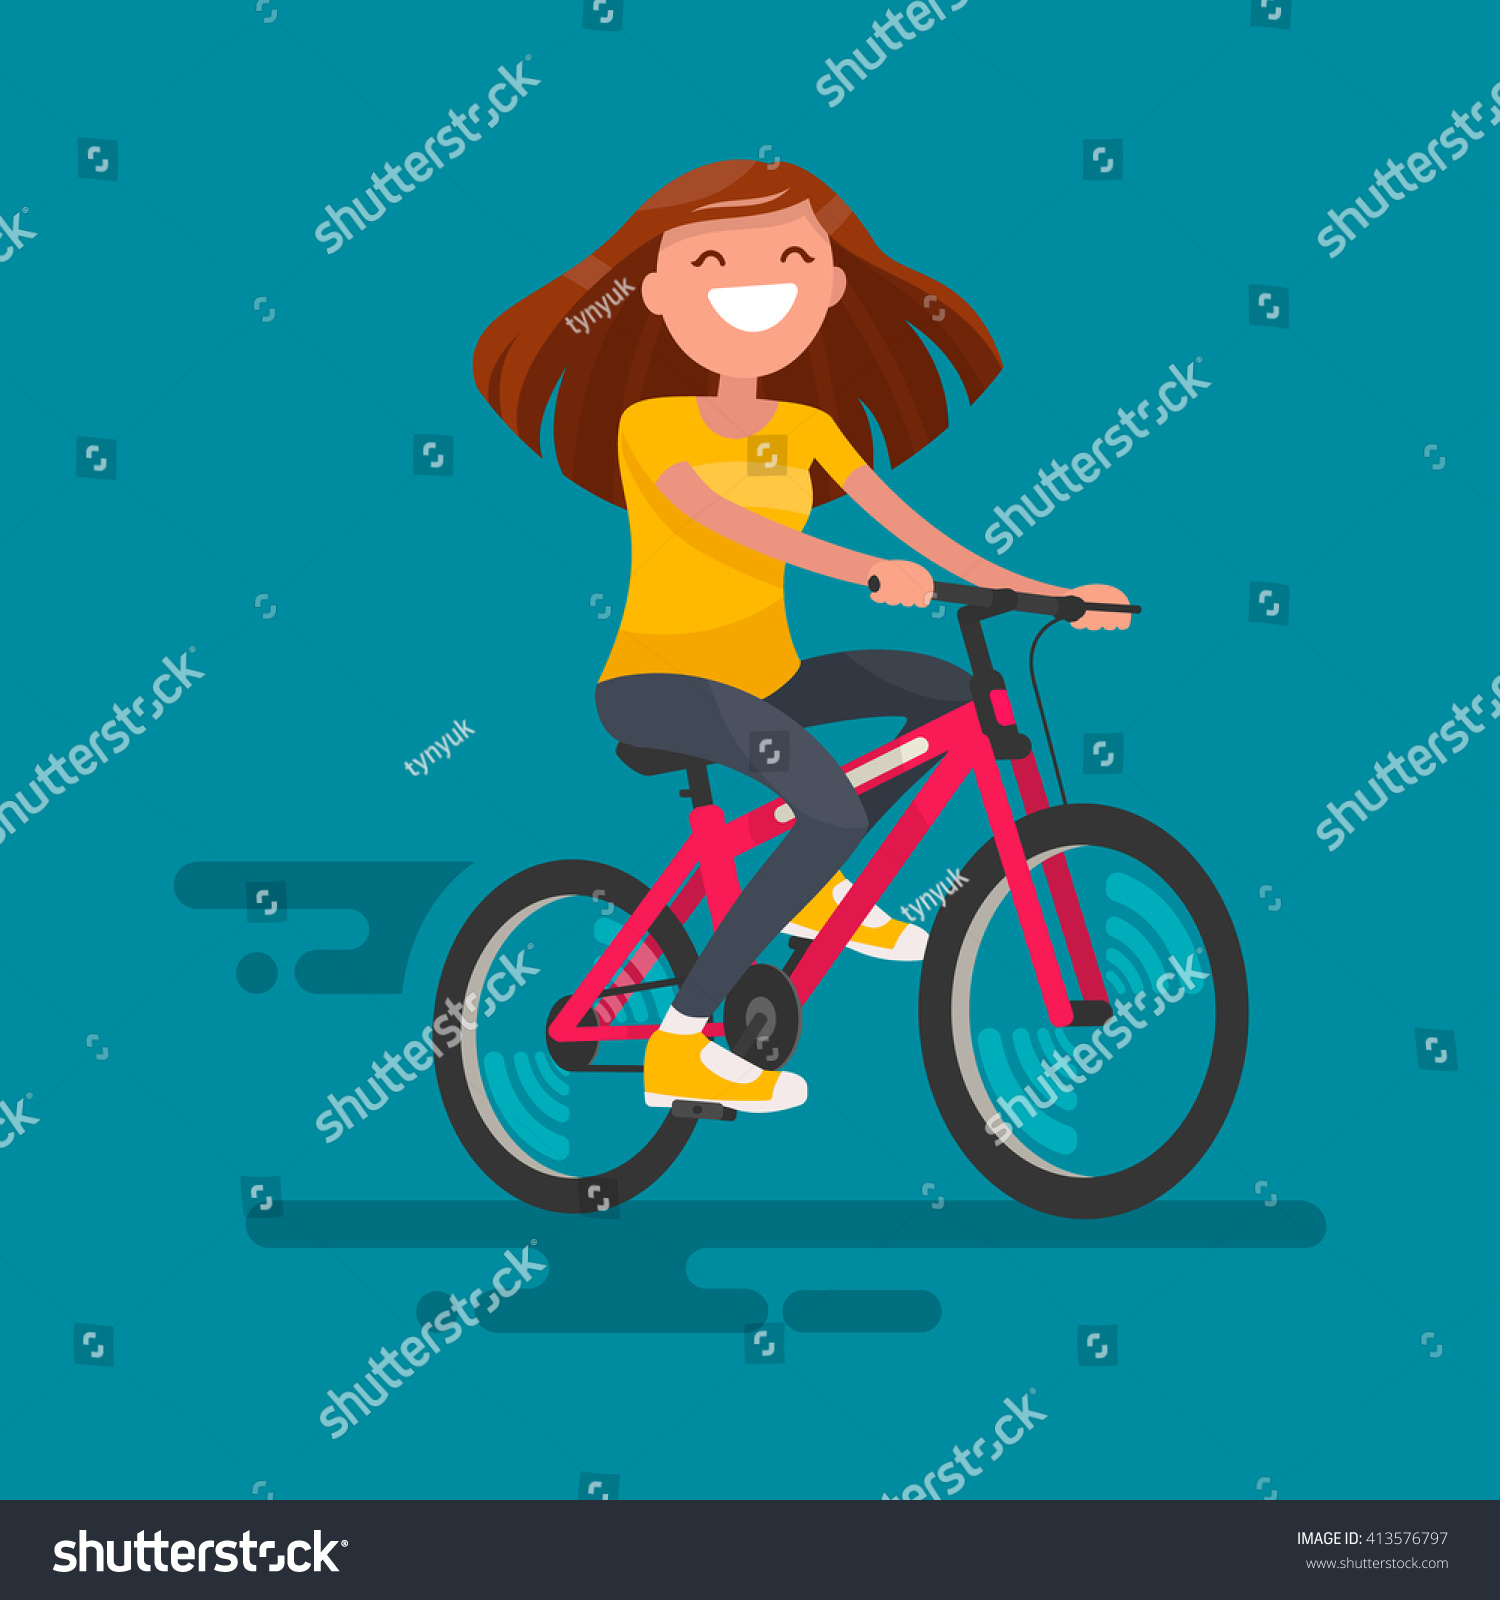 Happy Girl Riding Bicycle Vector Illustration Stock Vector Royalty Free 413576797 Shutterstock